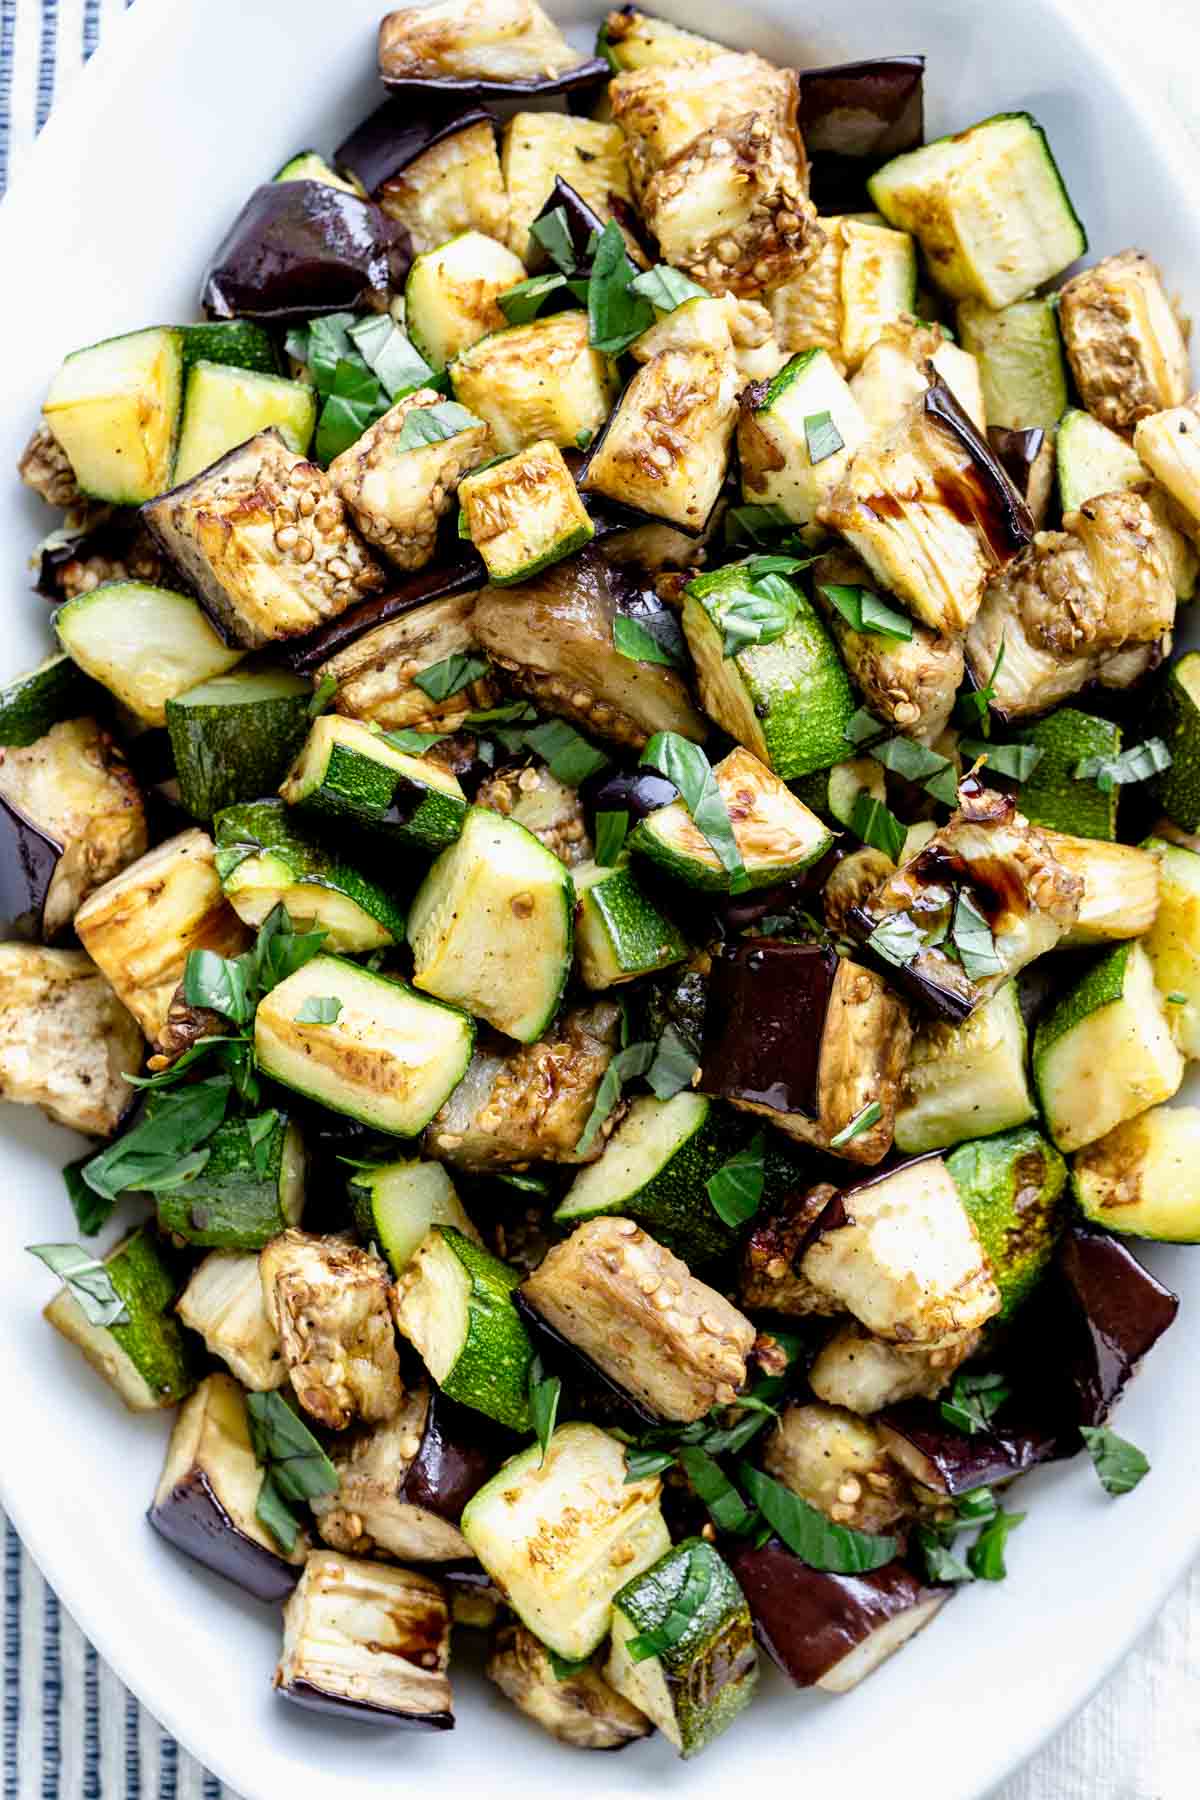 roasted eggplant and zucchini drizzled with balsamic vinegar and garnished with basil